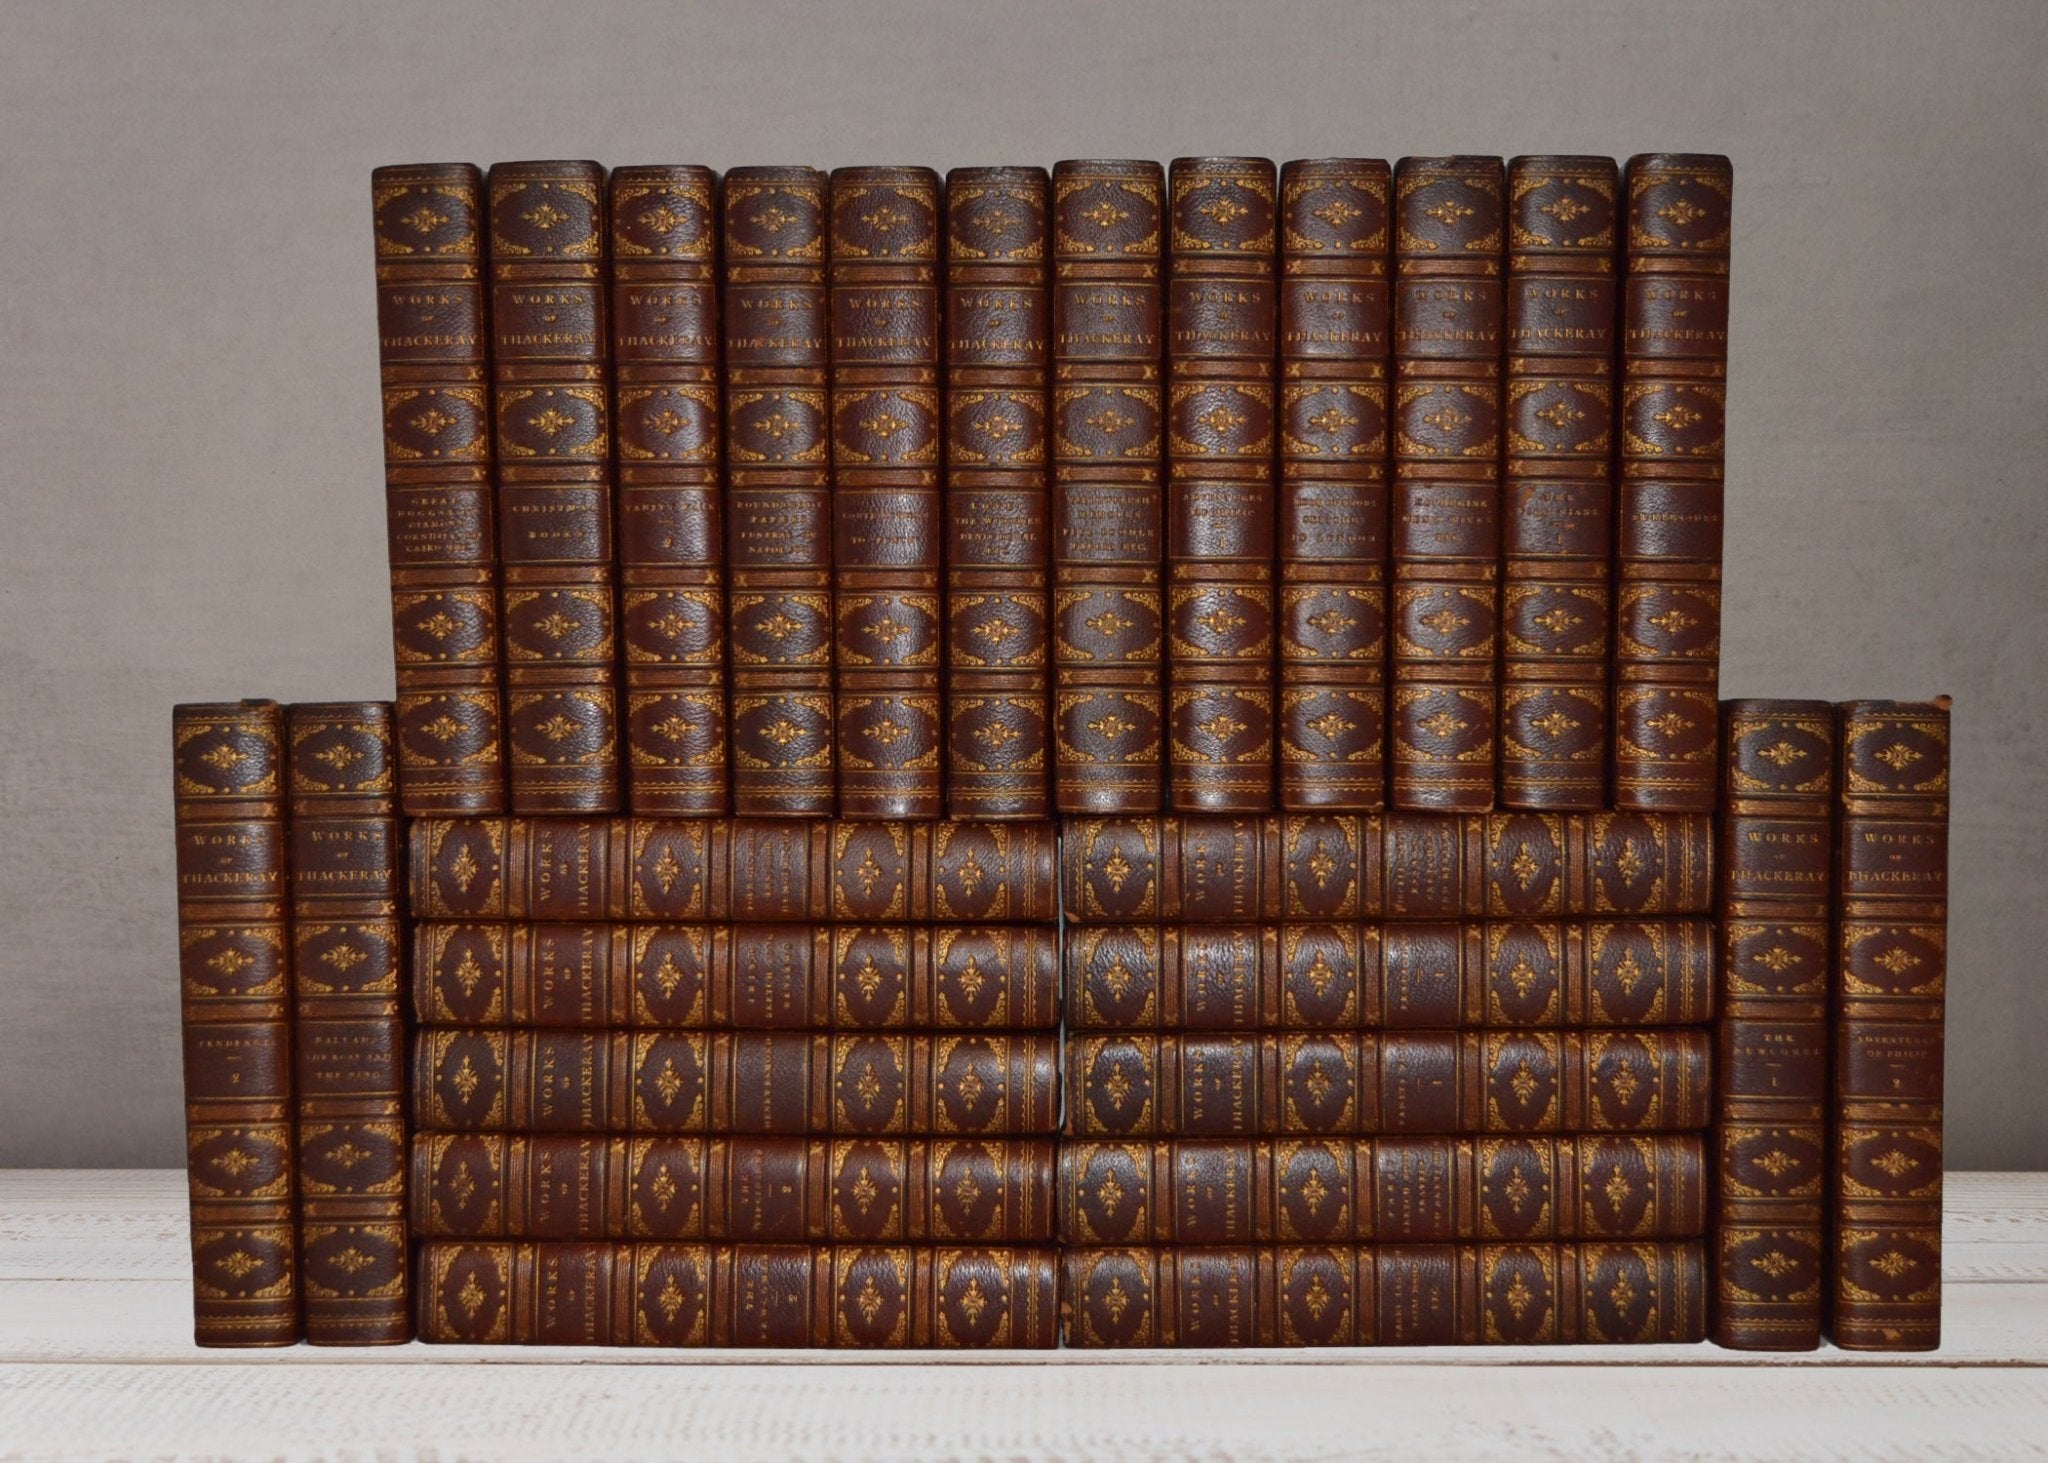 Works of William Makepeace Thackeray Complete in 26 Volumes – J. P. Lippincott 1901 - Brookfield Books